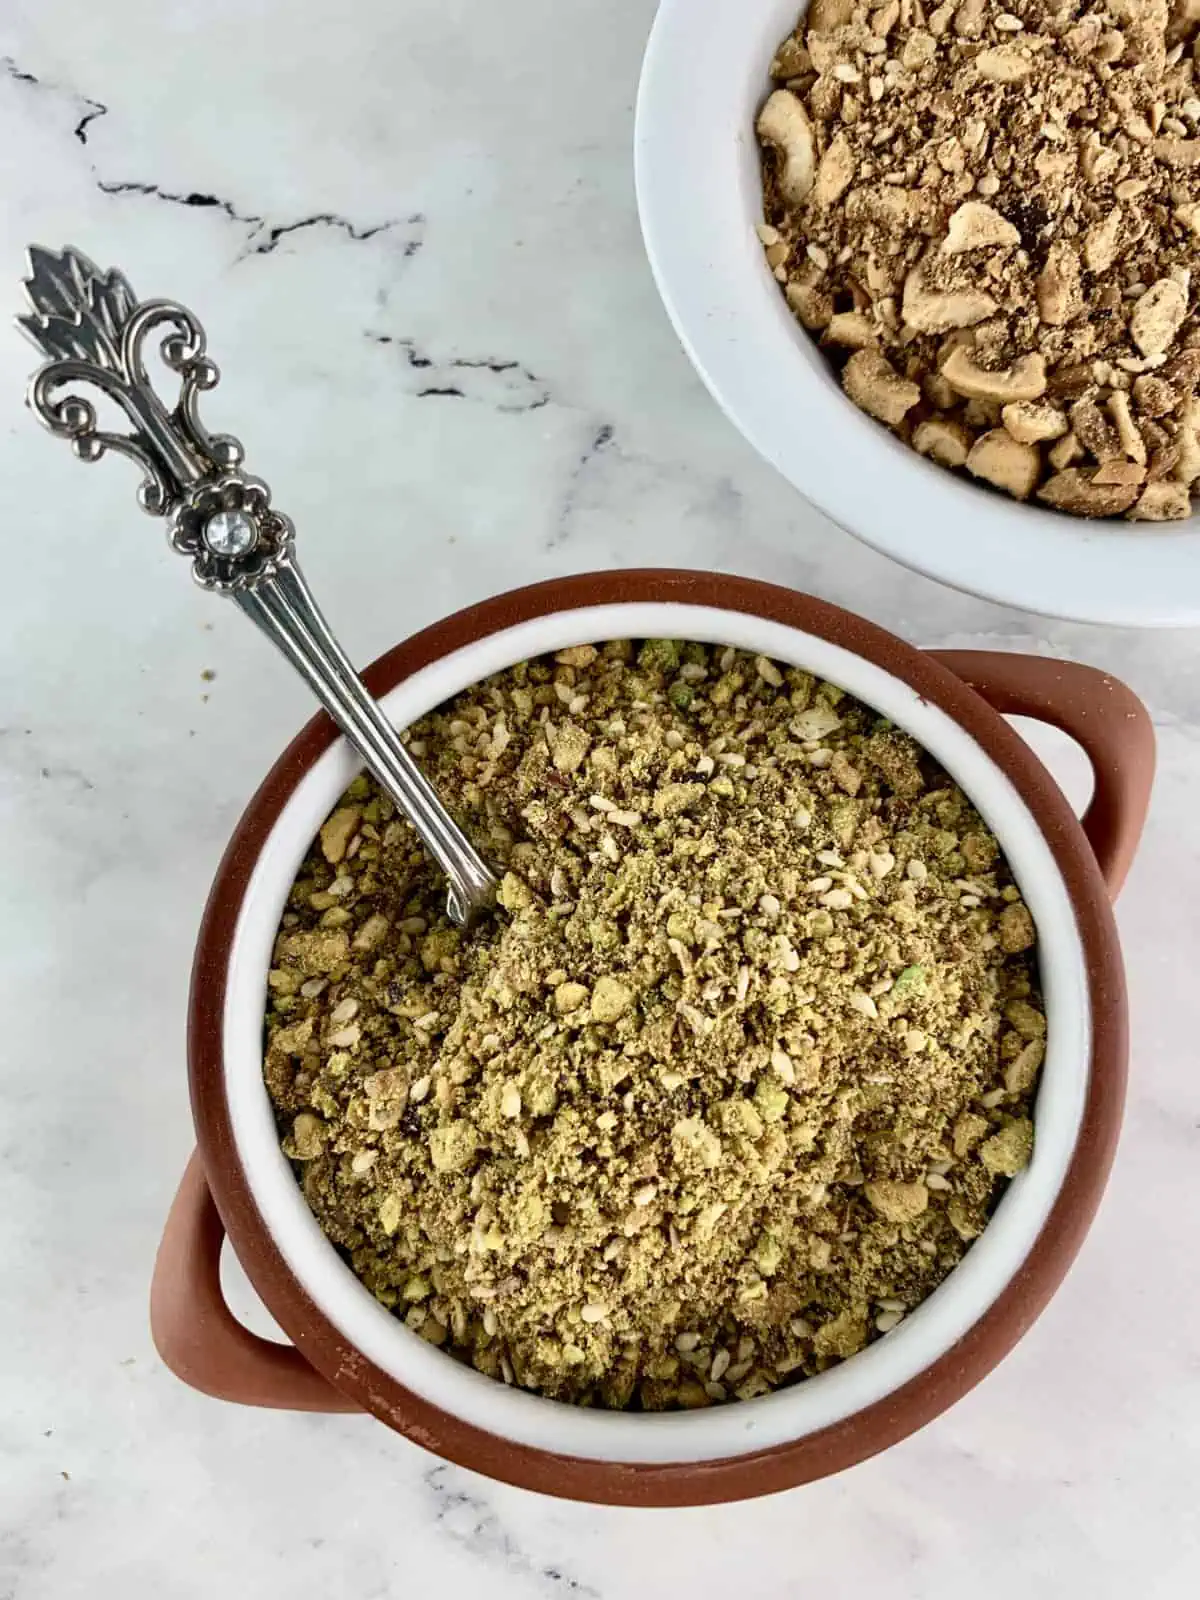 Pistachio dukkah recipe in a ceramic bowl with a spoon and nuts on the side.